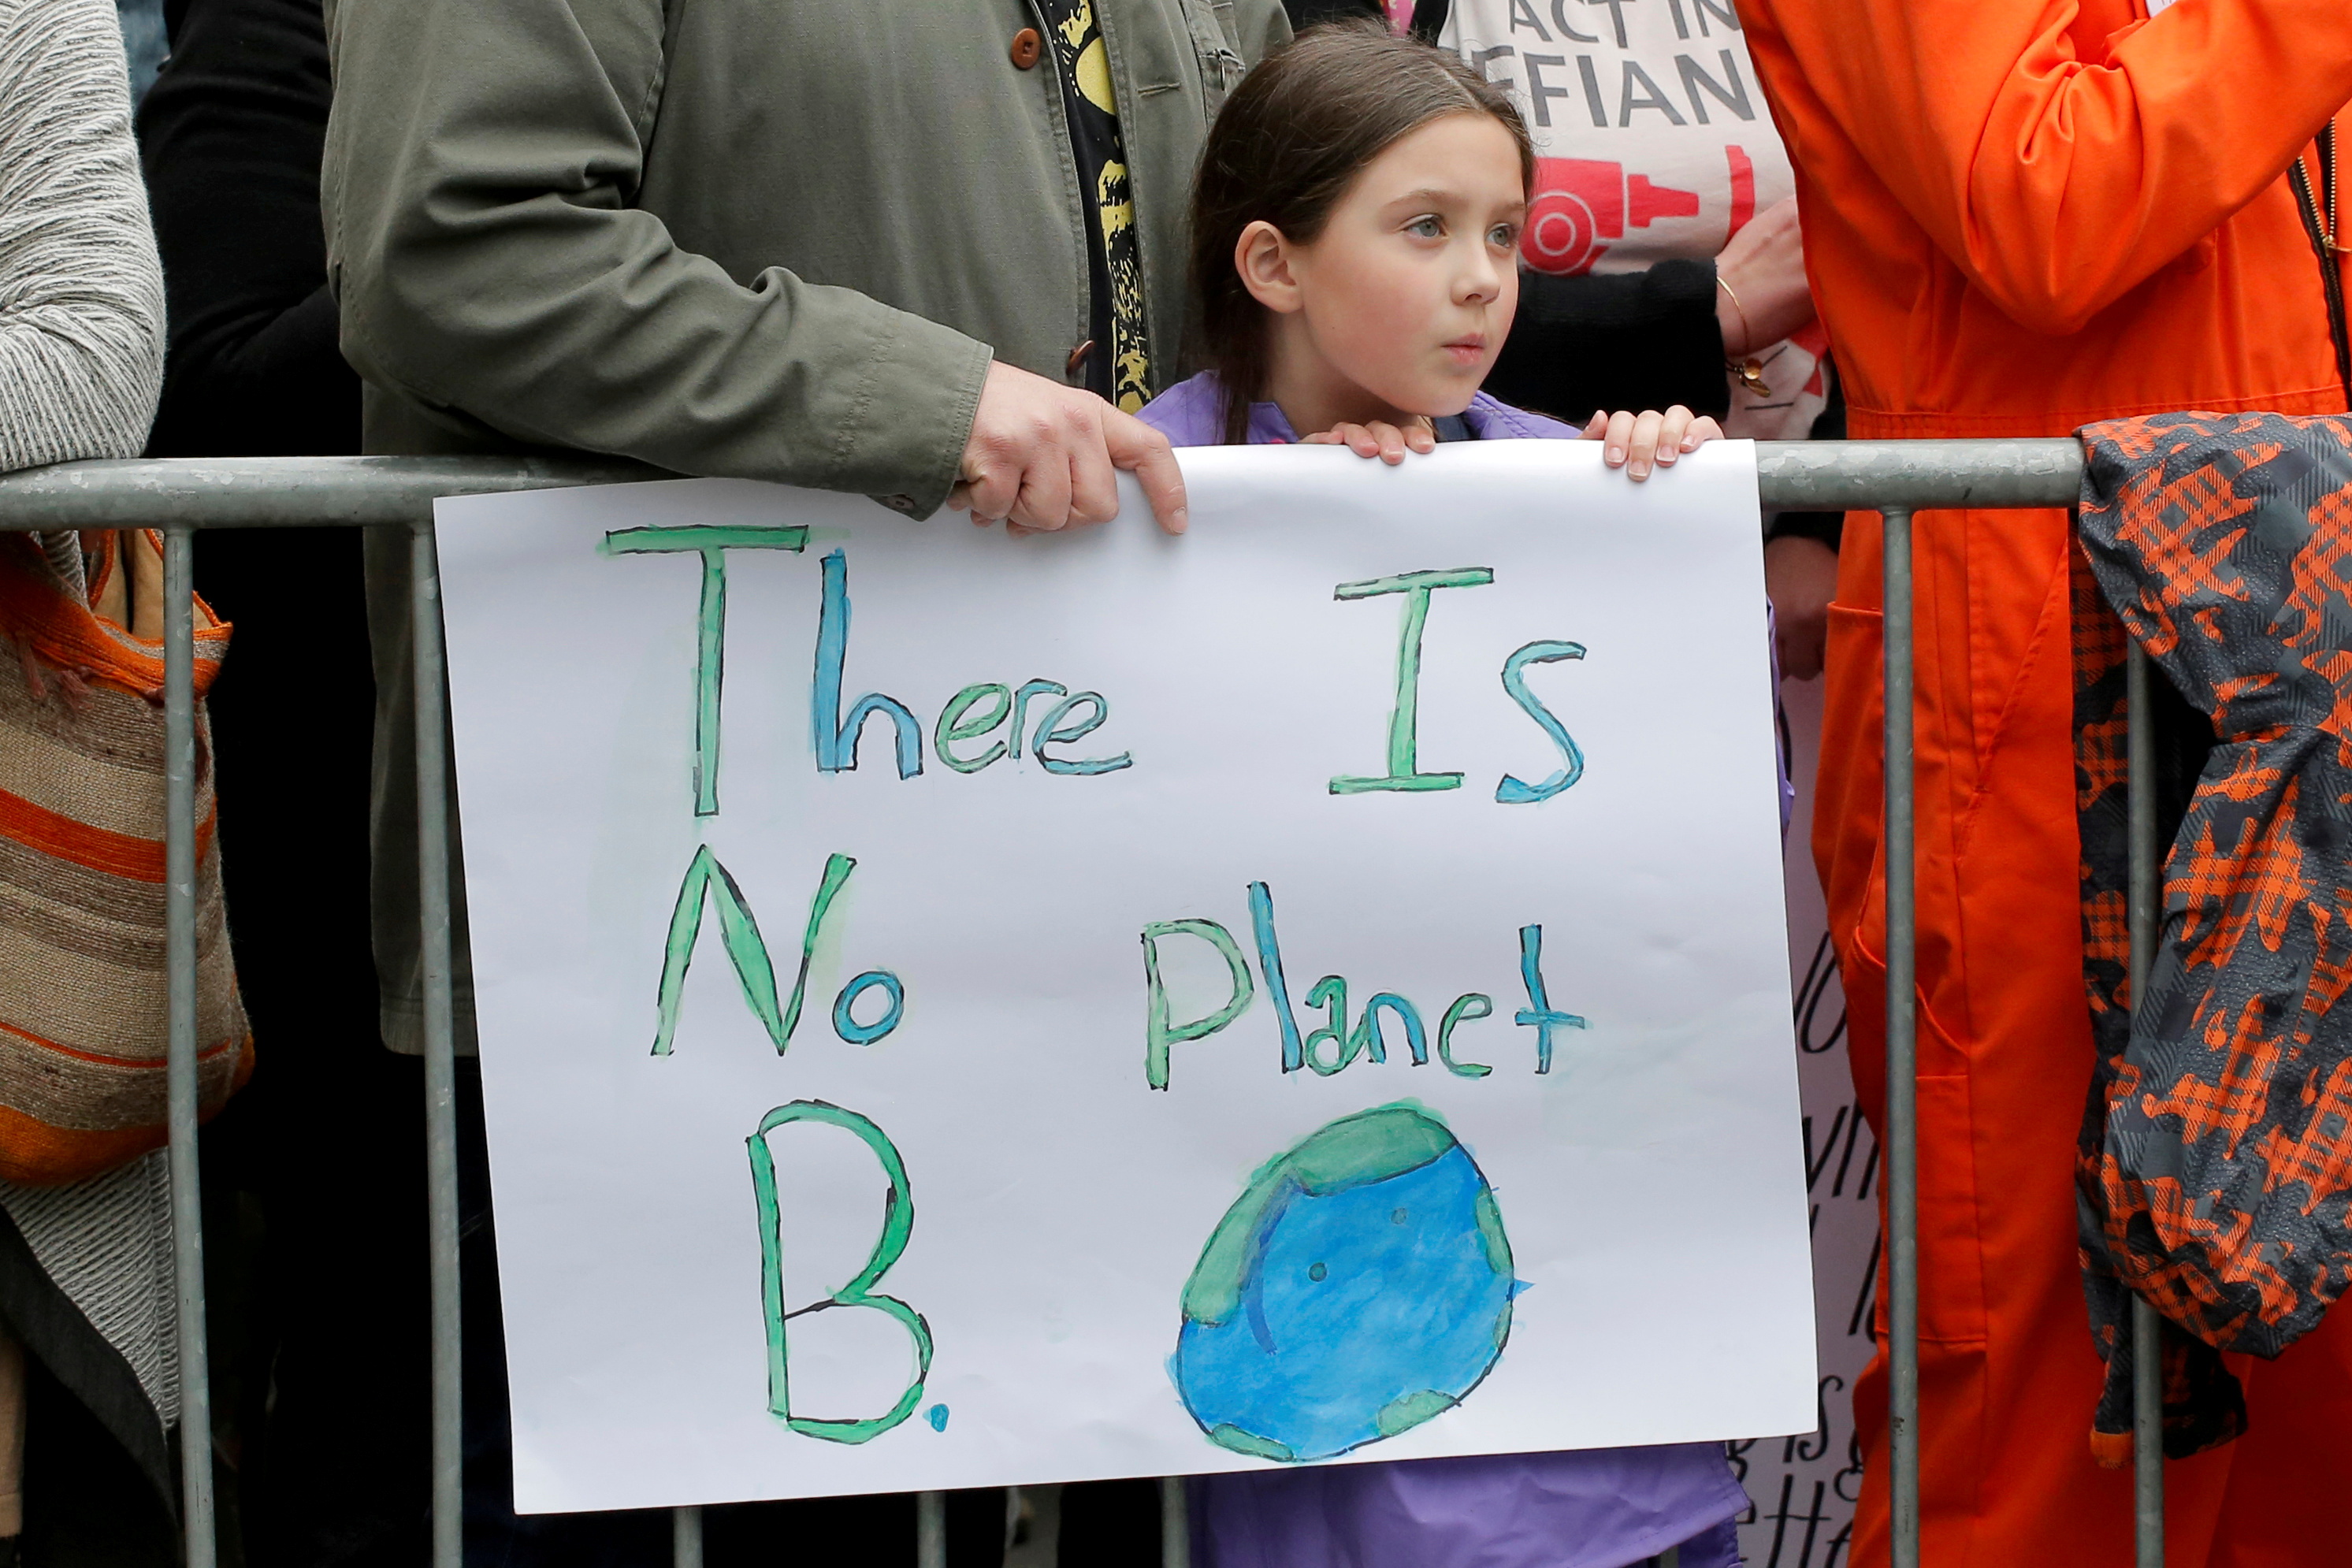 Protesters line Central Park West during the Earth Day 'March For Science NYC' demonstration to coincide with similar marches globally in Manhattan, New York, U.S.